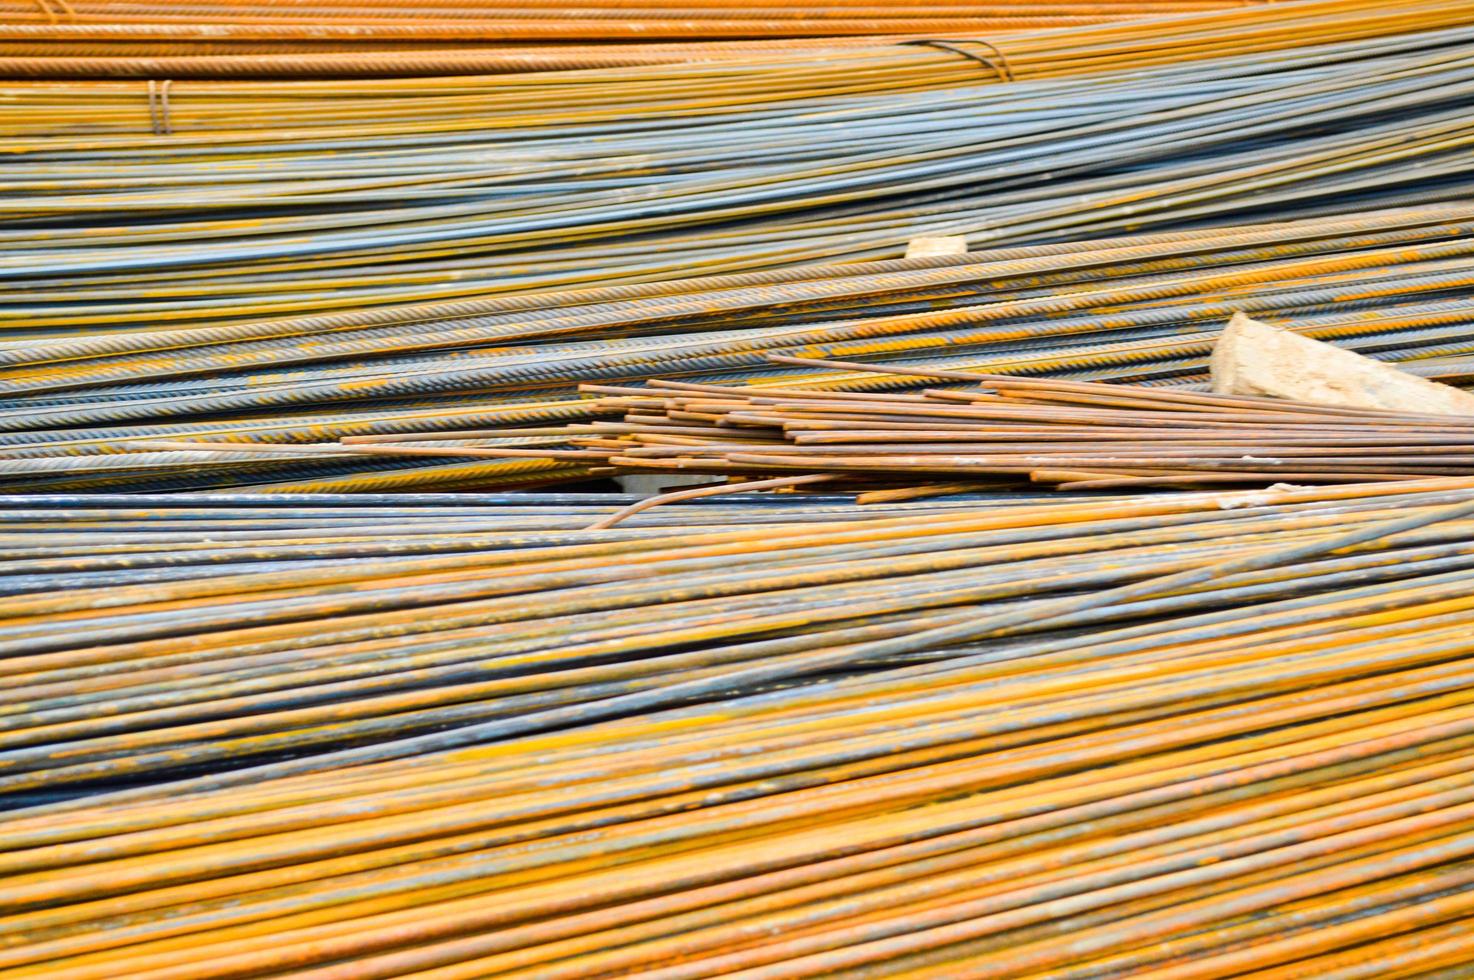 Iron metal rusty yellow bars of industrial building reinforcement from corrugated reinforcement for the construction of buildings made of reinforced concrete. Texture, background photo